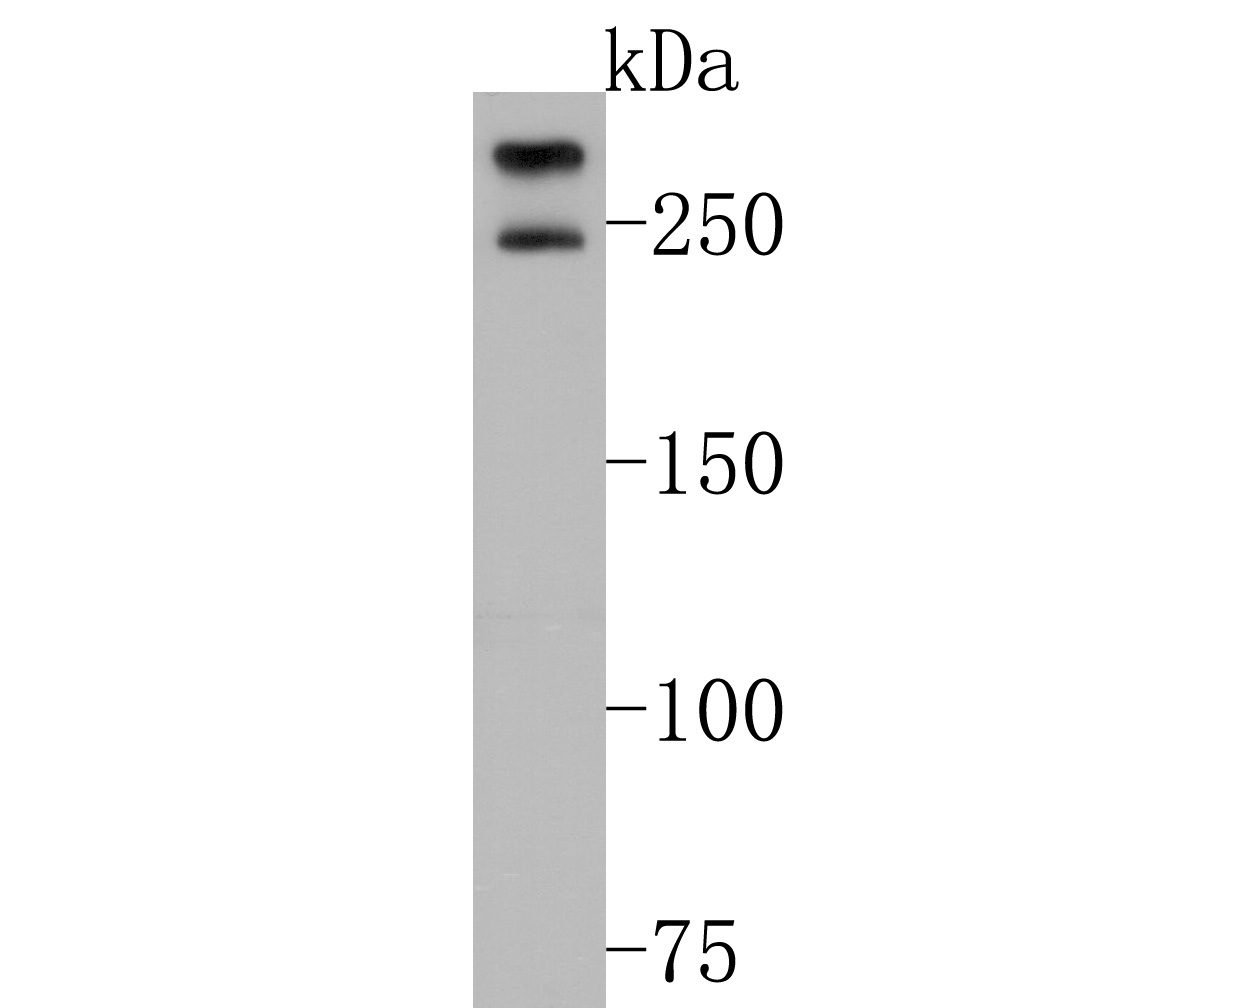 Western blot analysis of POLR2A on MCF-7 cell lysates. Proteins were transferred to a PVDF membrane and blocked with 5% NFDM/TBST for 1 hour at room temperature. The primary antibody (HA600062, 1/500) was used in 5% NFDM/TBST at room temperature for 2 hours. Goat Anti-Mouse IgG - HRP Secondary Antibody (HA1006) at 1:20,000 dilution was used for 1 hour at room temperature.